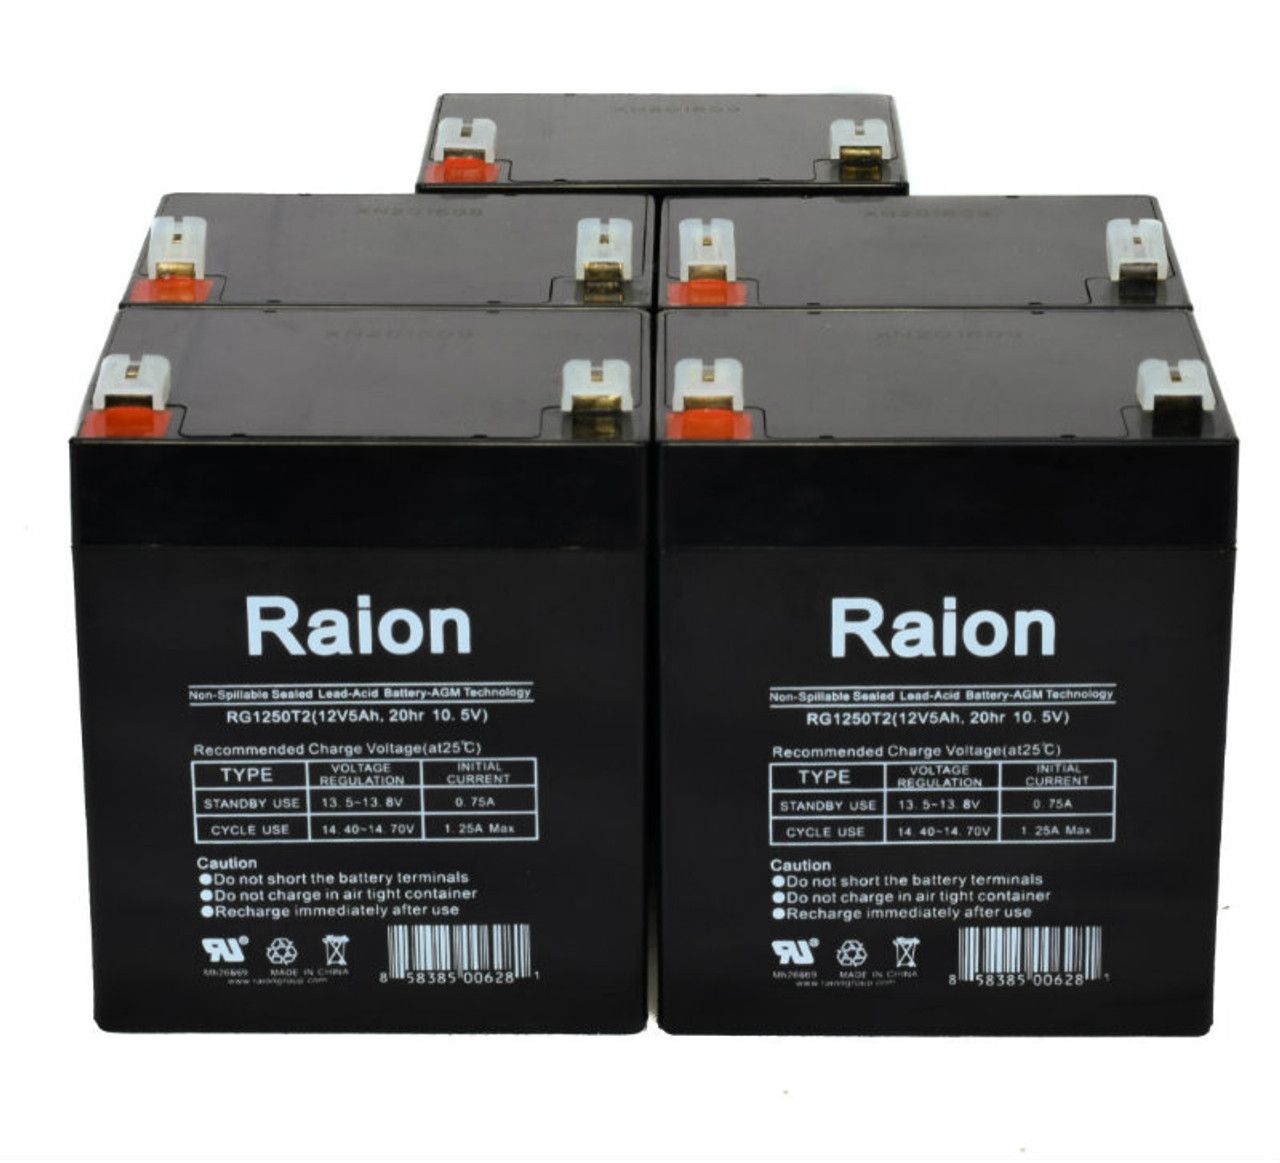 Raion Power RG1250T1 12V 5Ah Medical Battery for Medical Research Lab 550ST Recorder - 5 Pack